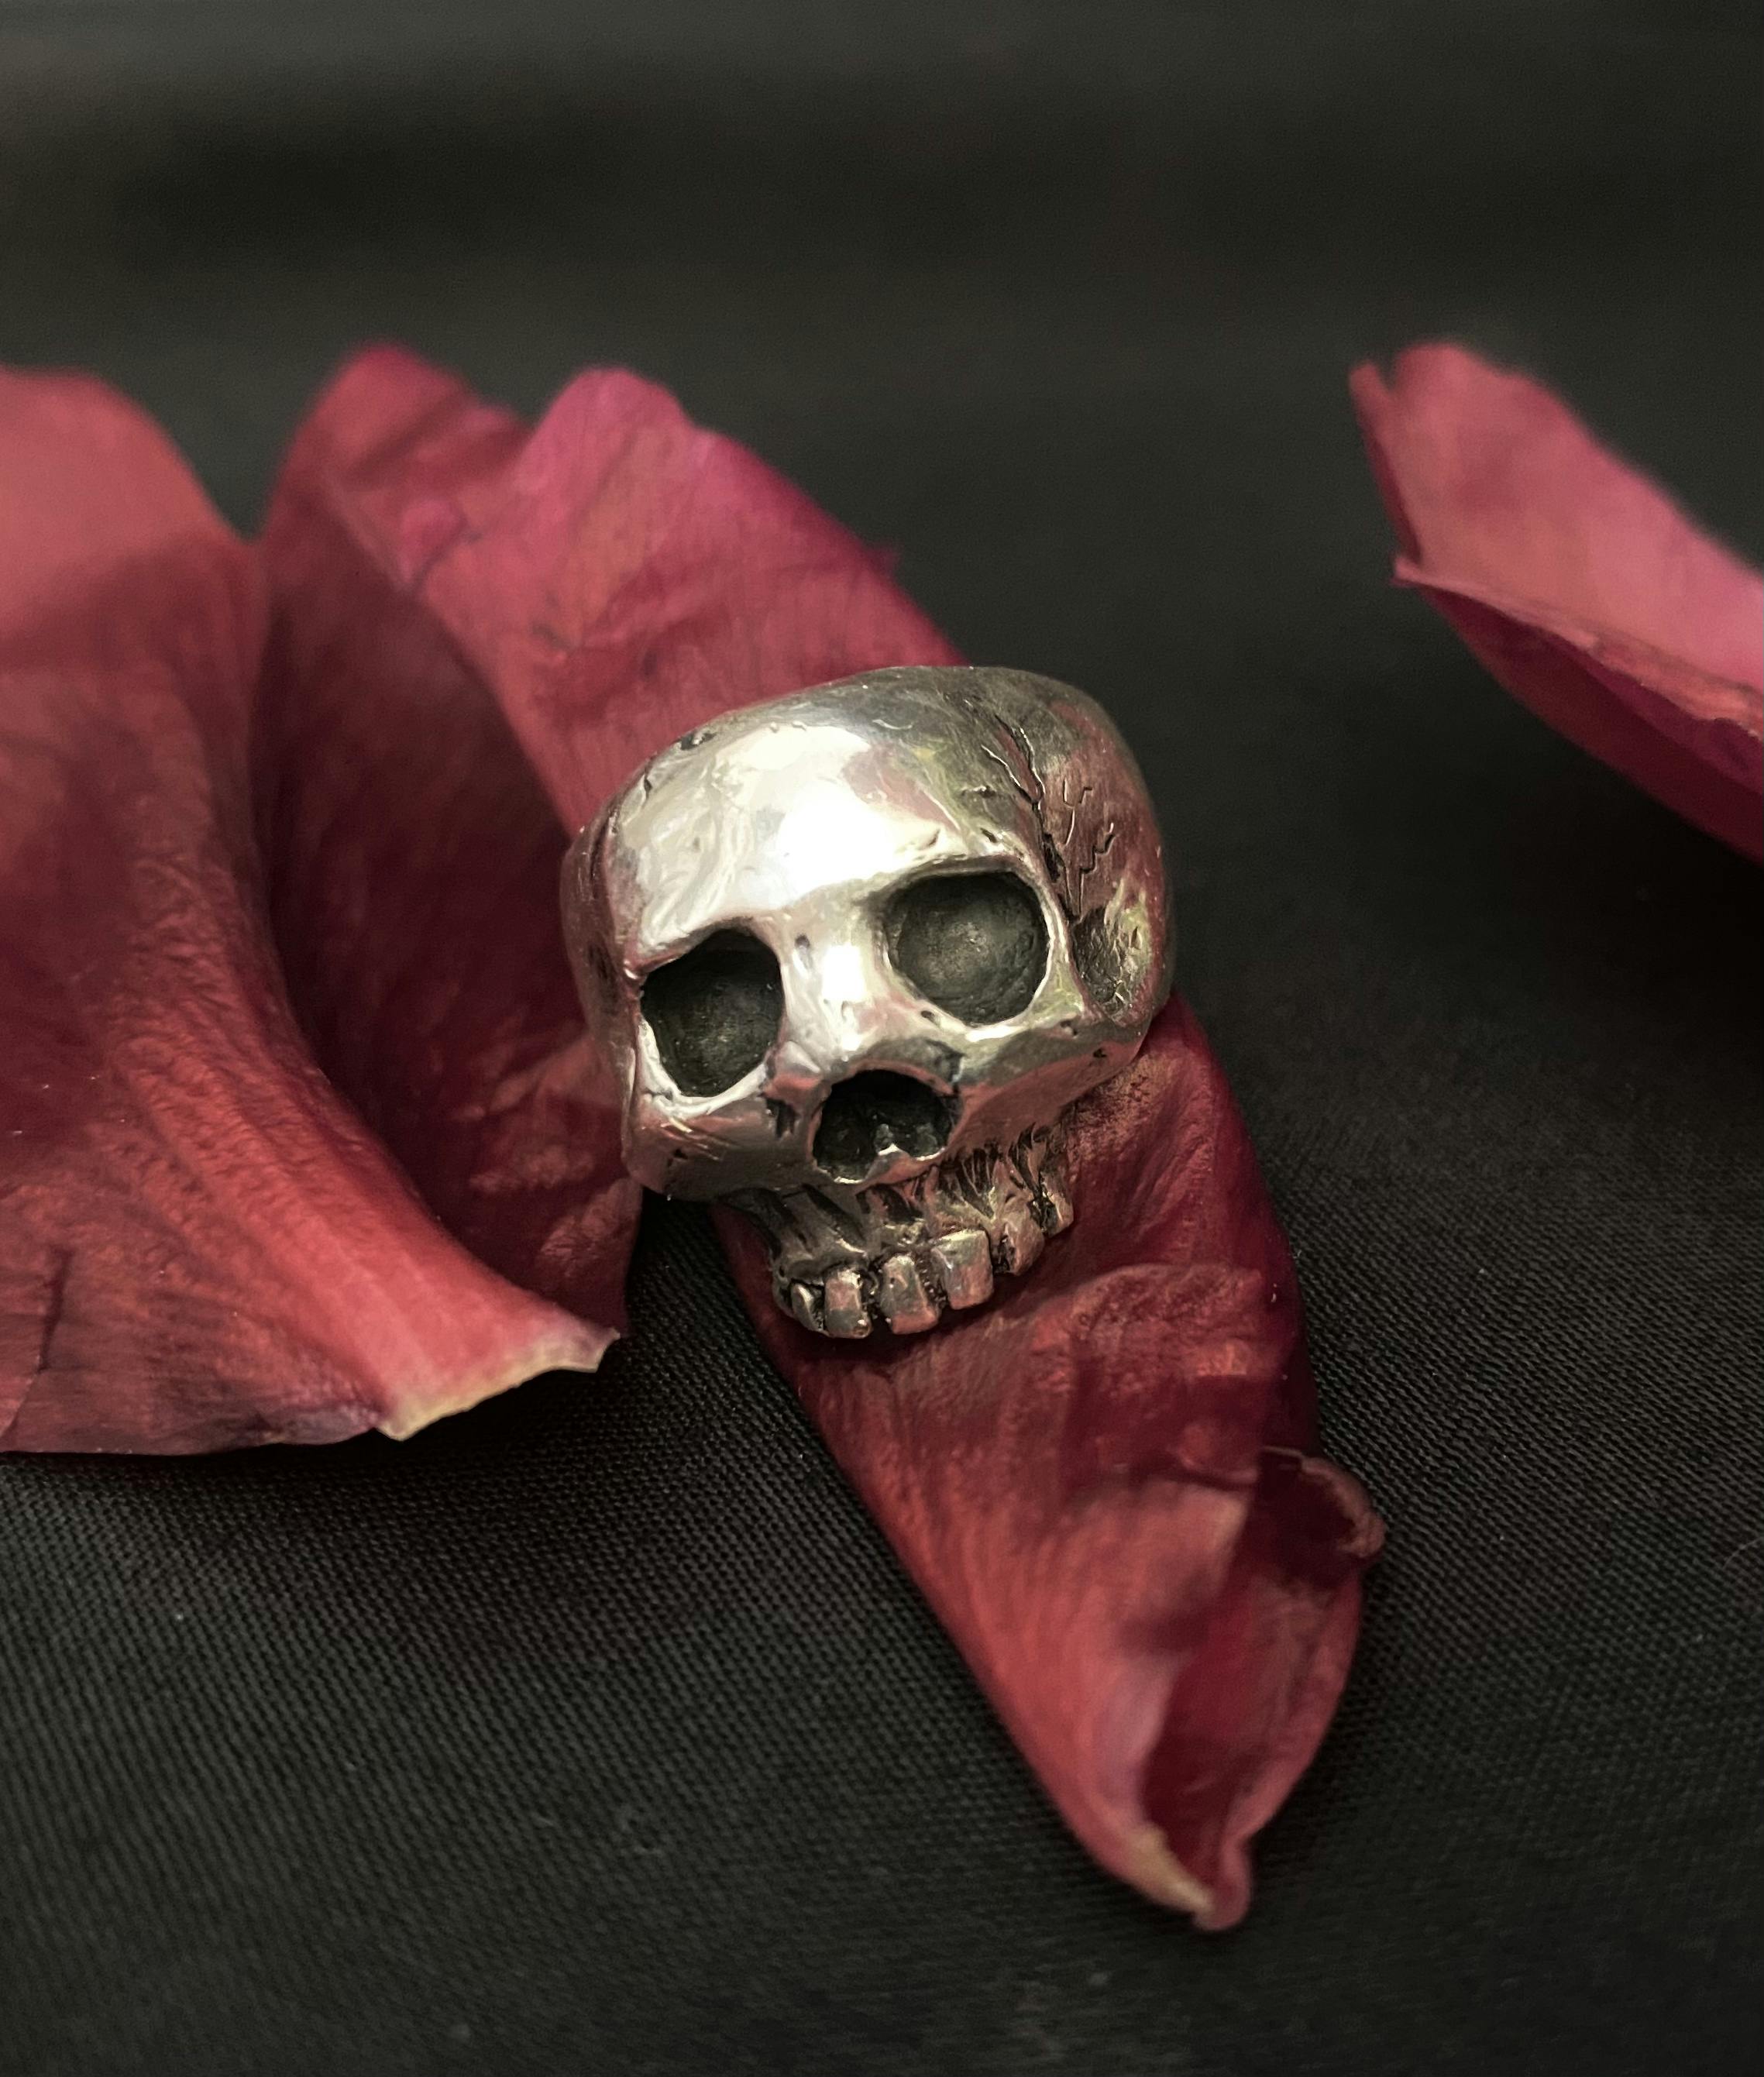 A large skull with no lower jaw made from silver sits on the front of the ring. The skull has blackened carved details of deep eye sockets, nose crevice and teeth, as well as some cracking details on the sides of the skull.